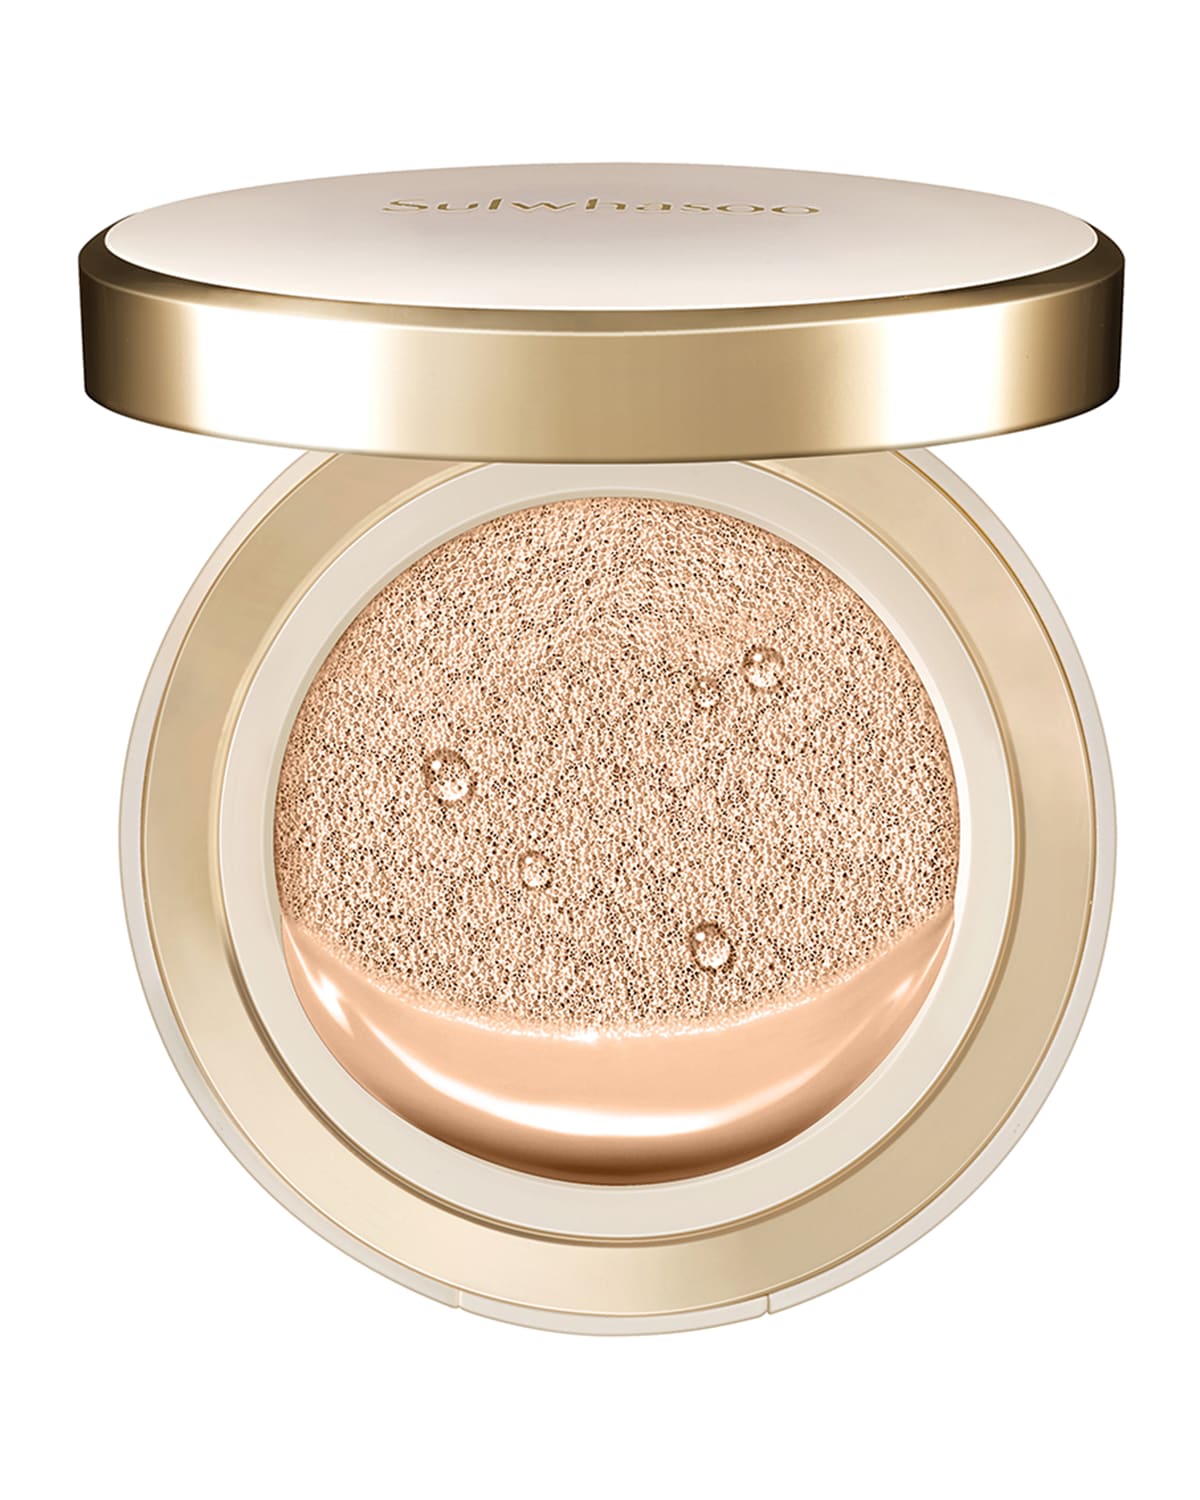 Sulwhasoo Perfecting Cushion In Neutral